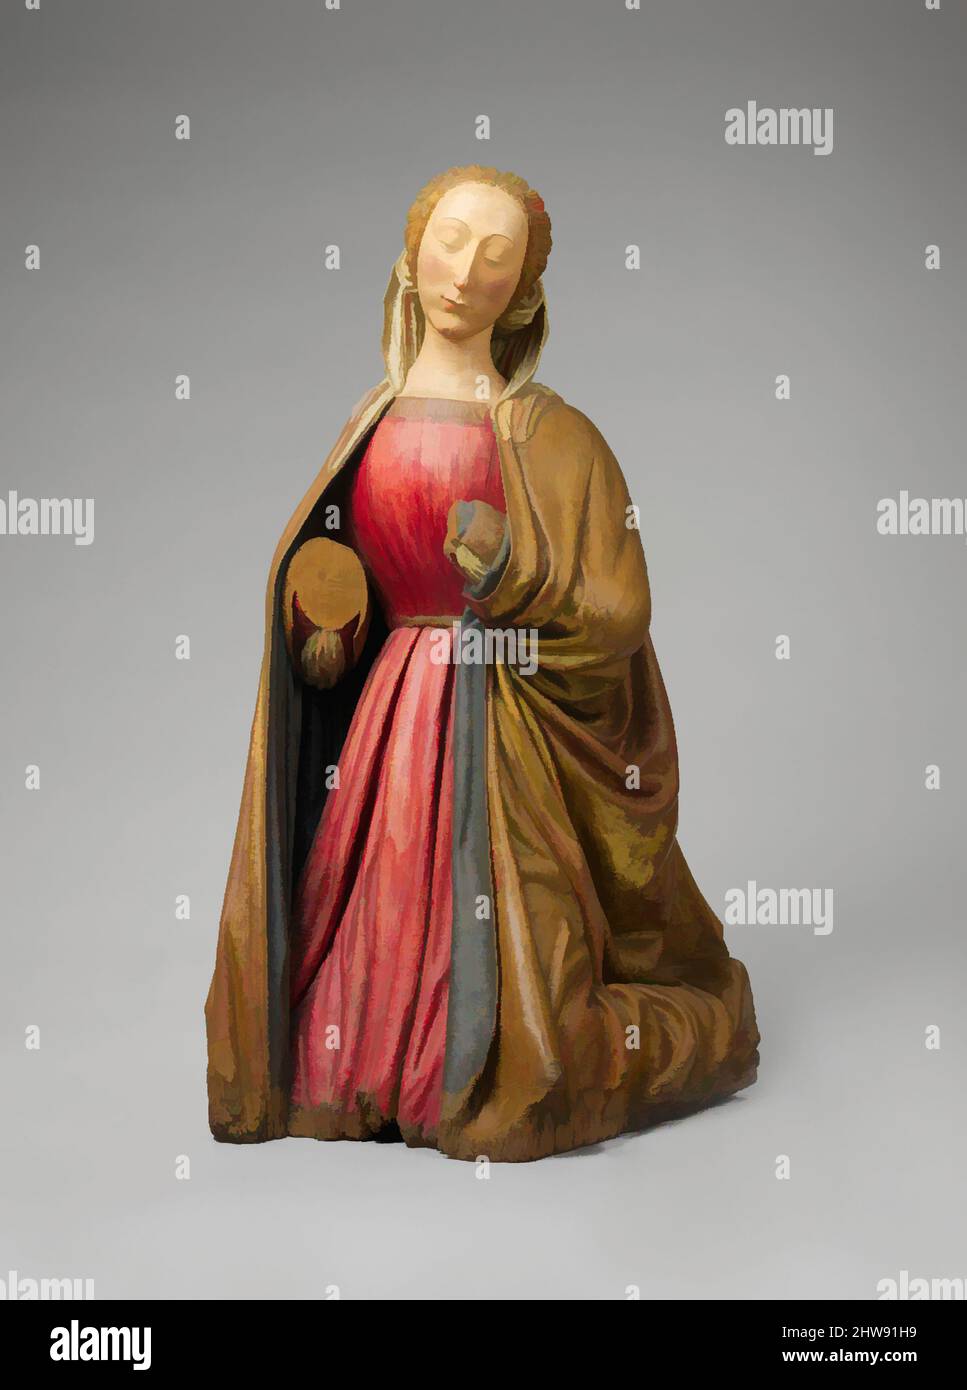 Art inspired by Kneeling Virgin, ca. 1474–1500, Made in Abruzzo, Italy, Italian, Willow, paint, and gilt, Overall: 46 1/8 x 31 1/2 x 19 3/4 in., 63lb. (117.2 x 80 x 50.2 cm, 28576.6g), Sculpture-Wood, Attributed to Paolo Aquilano (Italian, Abruzzo, active ca. 1475–1503) (Sculptor of, Classic works modernized by Artotop with a splash of modernity. Shapes, color and value, eye-catching visual impact on art. Emotions through freedom of artworks in a contemporary way. A timeless message pursuing a wildly creative new direction. Artists turning to the digital medium and creating the Artotop NFT Stock Photo